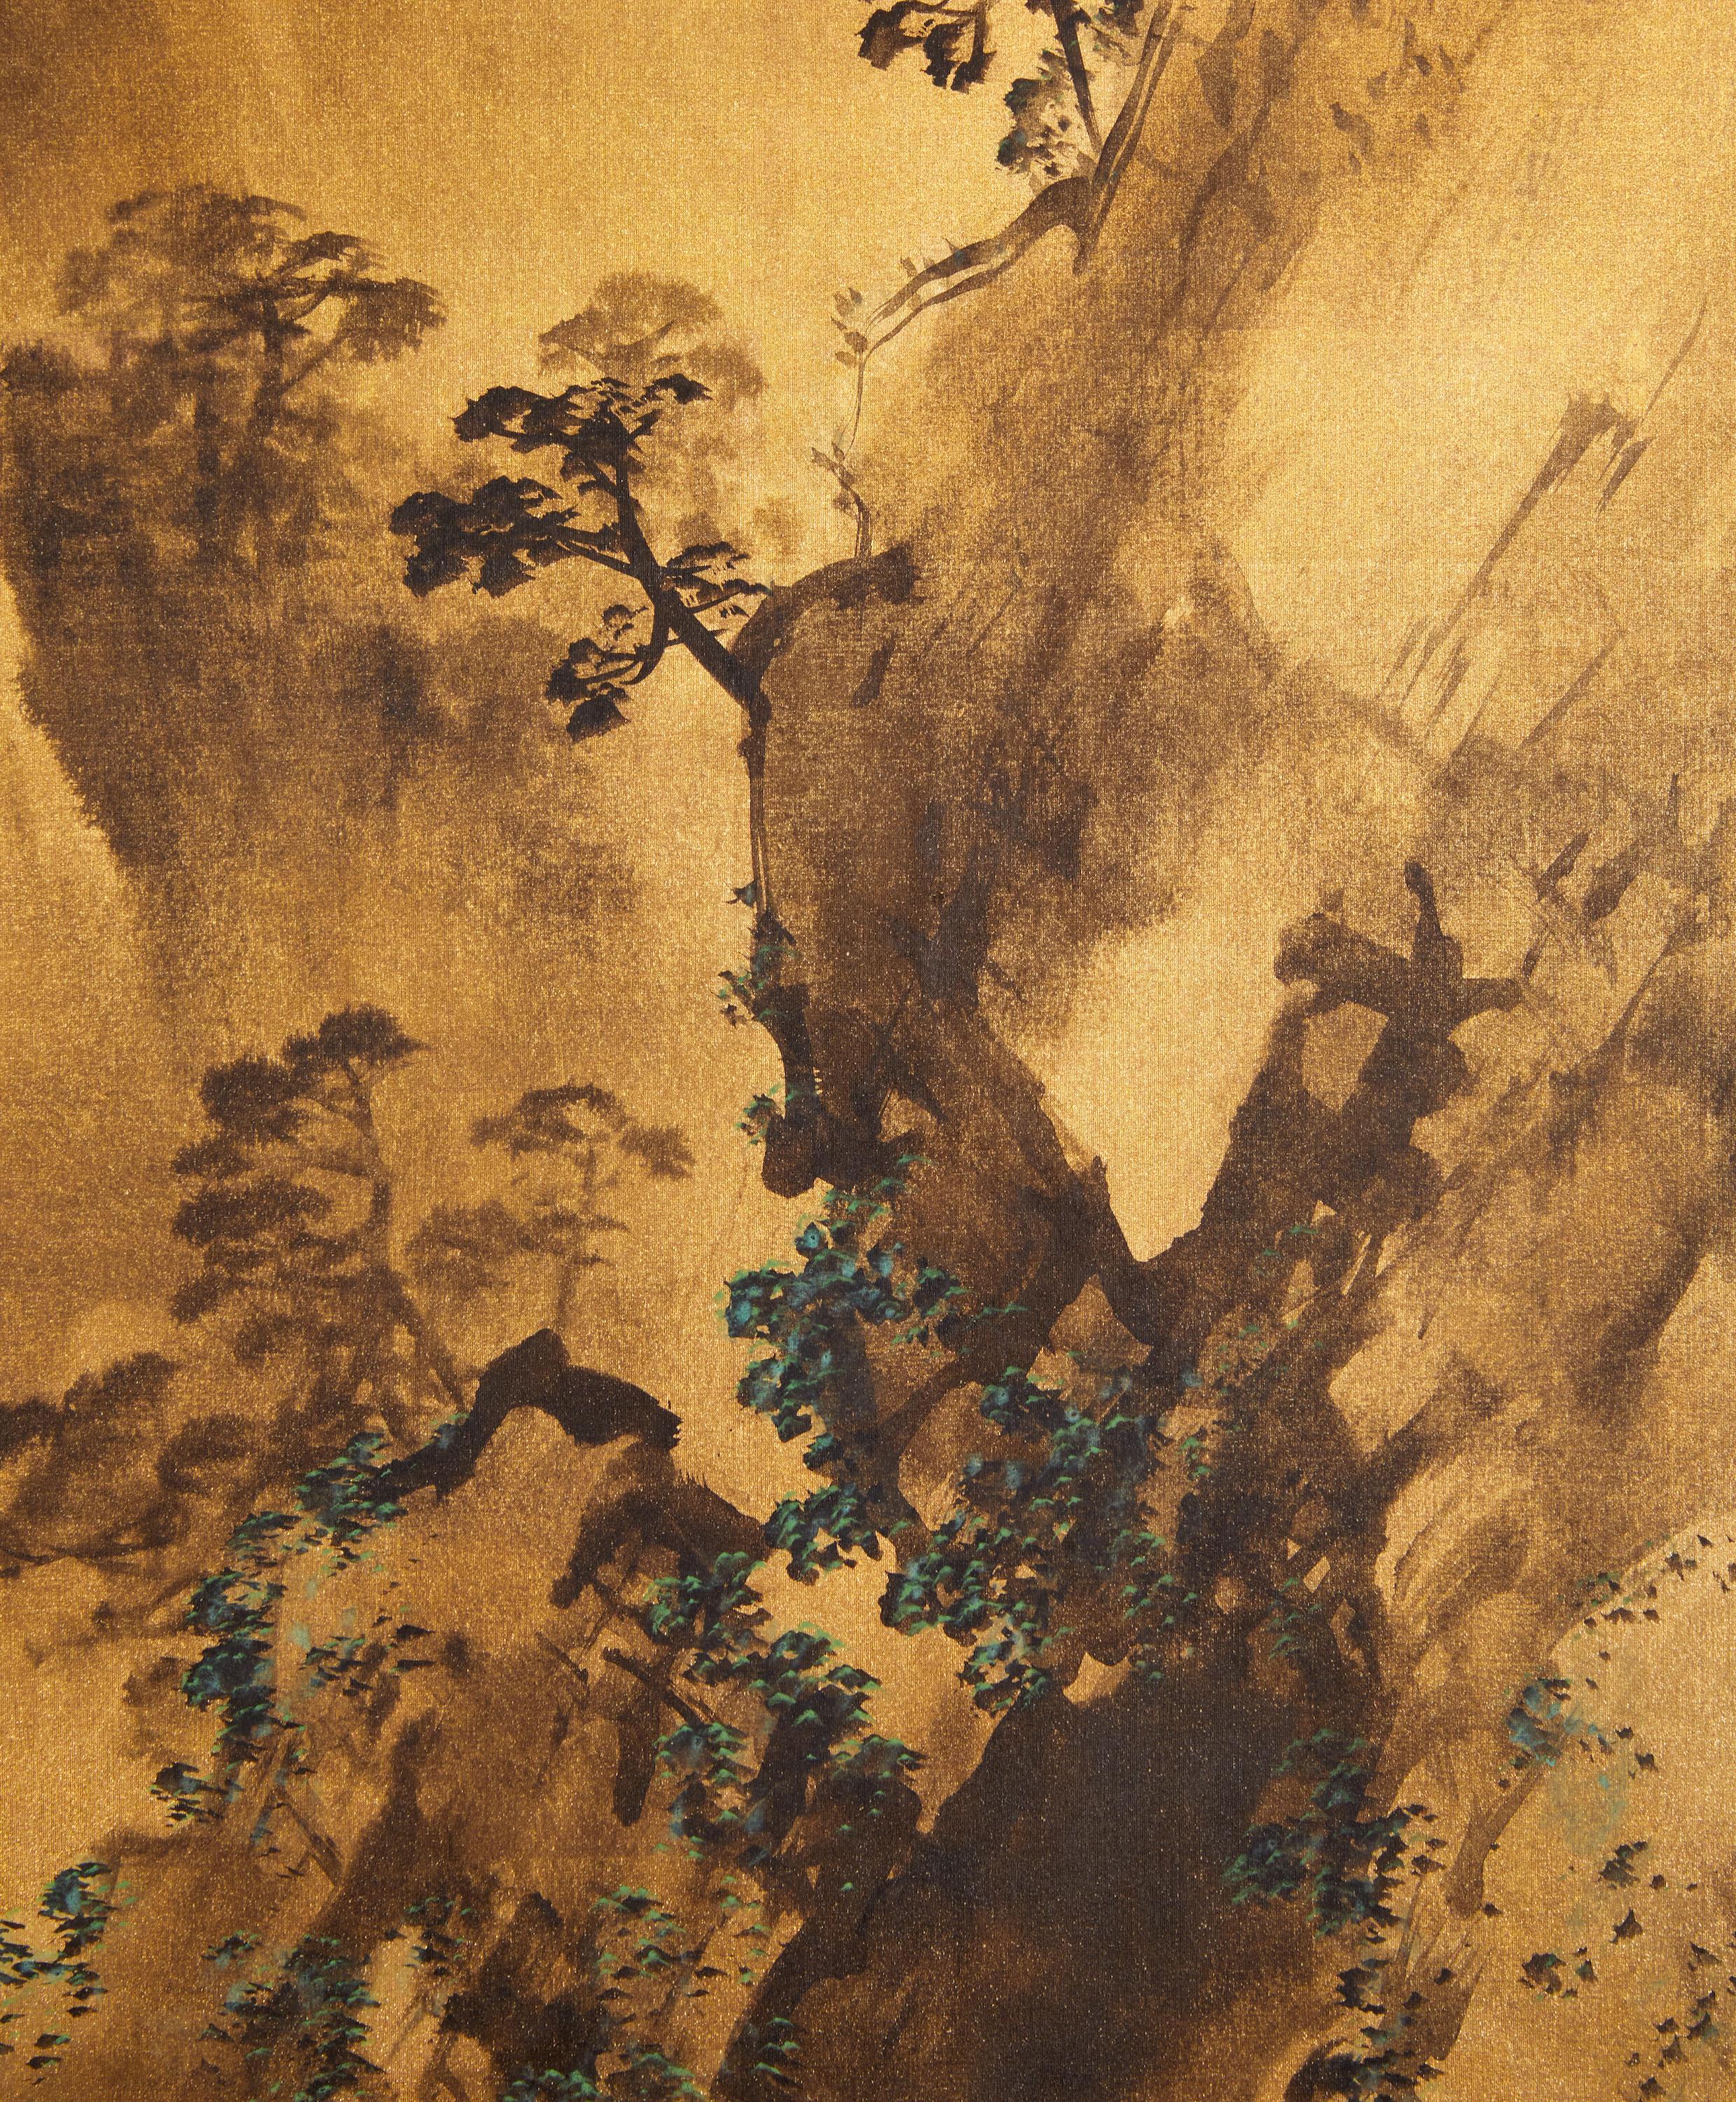 Dramatic Mountain landscape with gnarled pines. Signature reads: Shunsen. Ink painting on gold silk with silk brocade border.